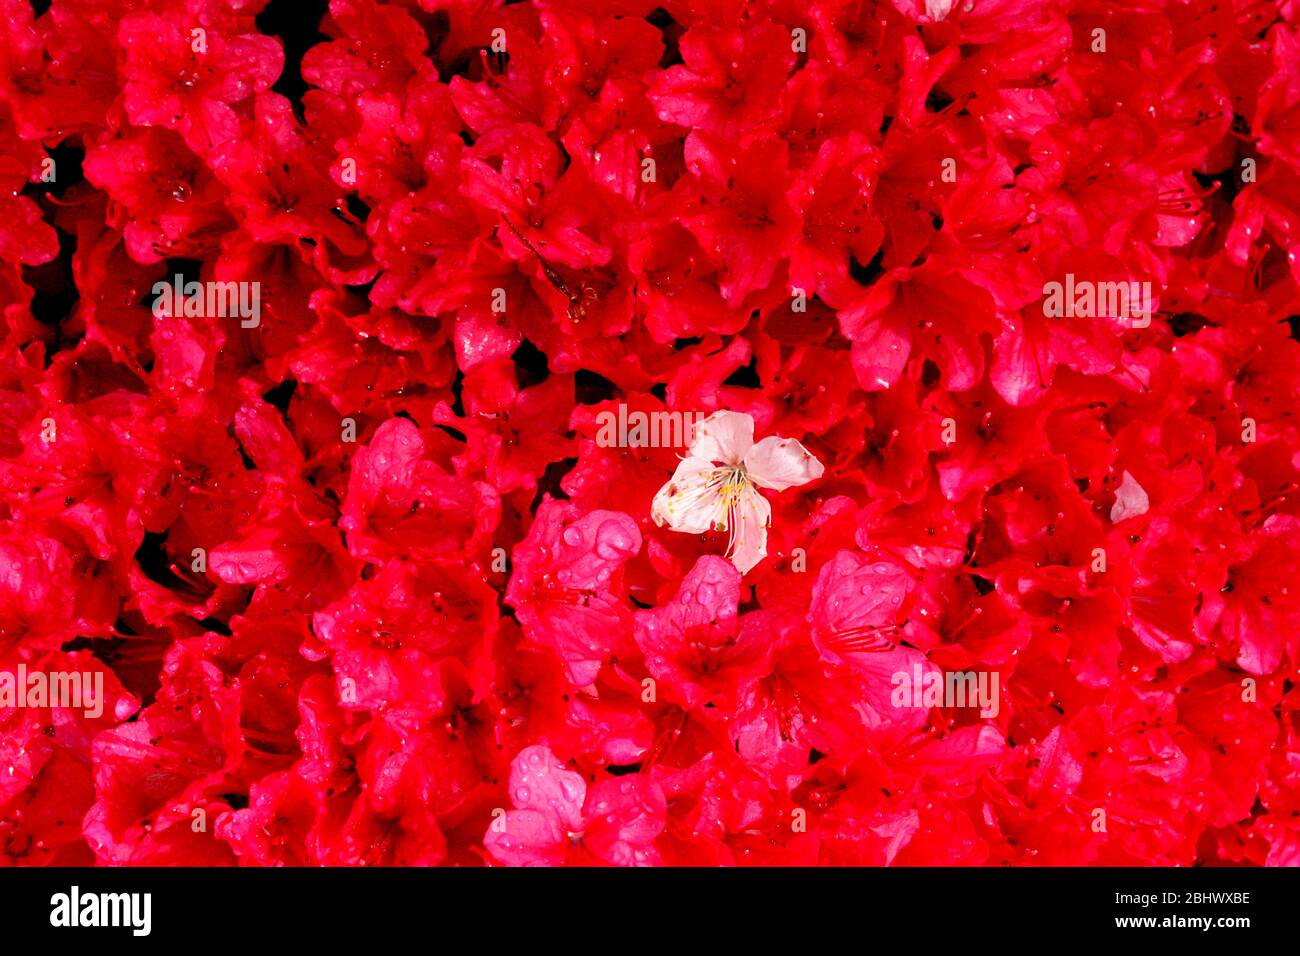 One white cherry blossom amongst a swathe of red flowers Stock Photo